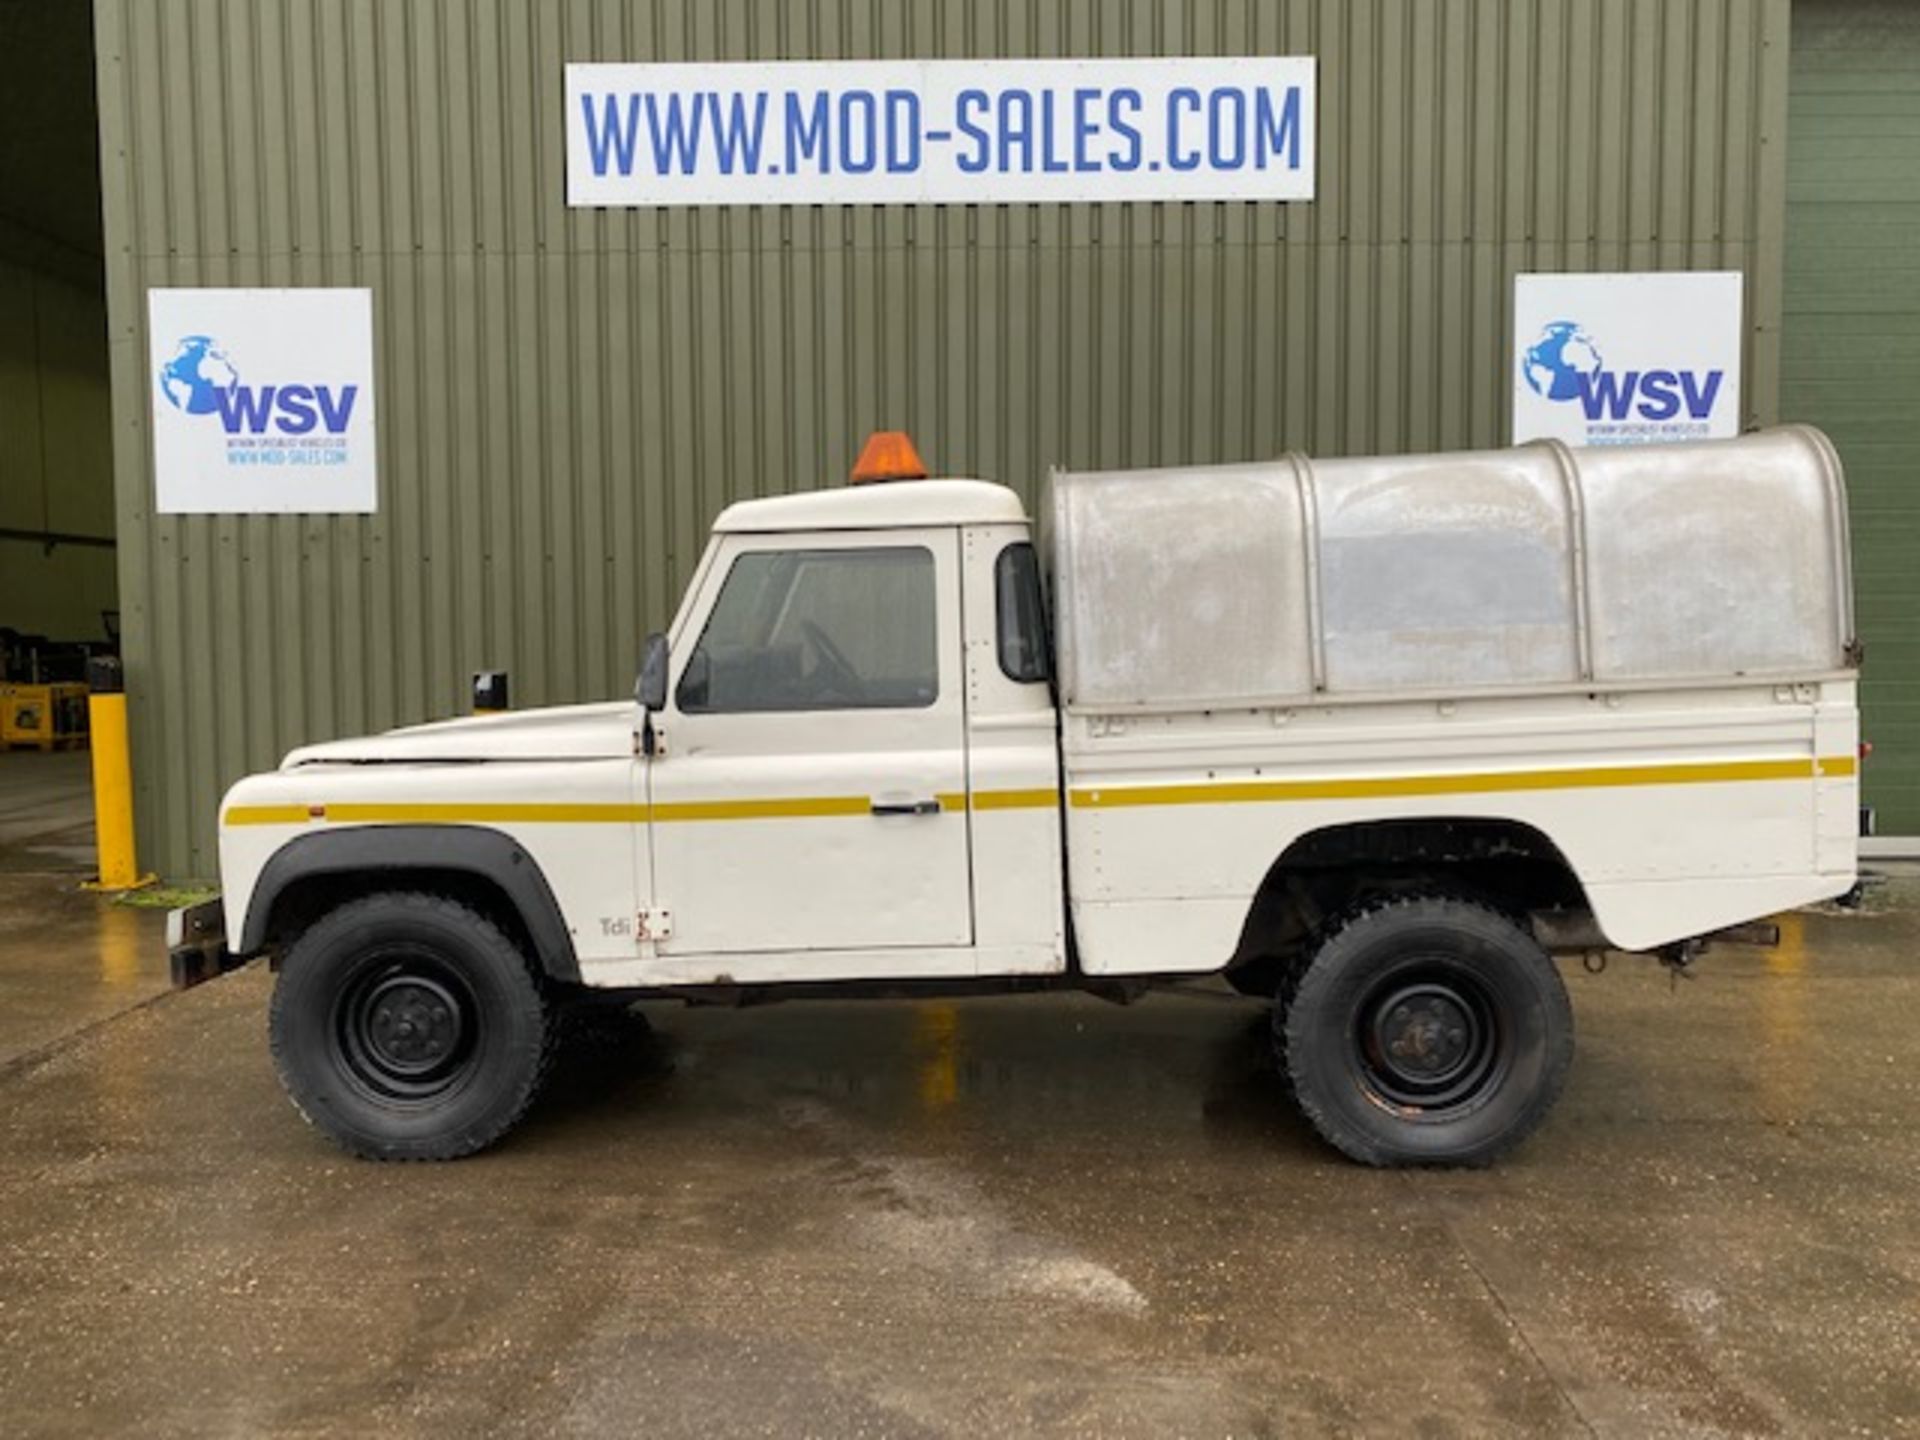 1 Owner Recent Release from UK Council 1998 Land Rover Defender 110 Hi-Capacity Pick Up - Image 6 of 41